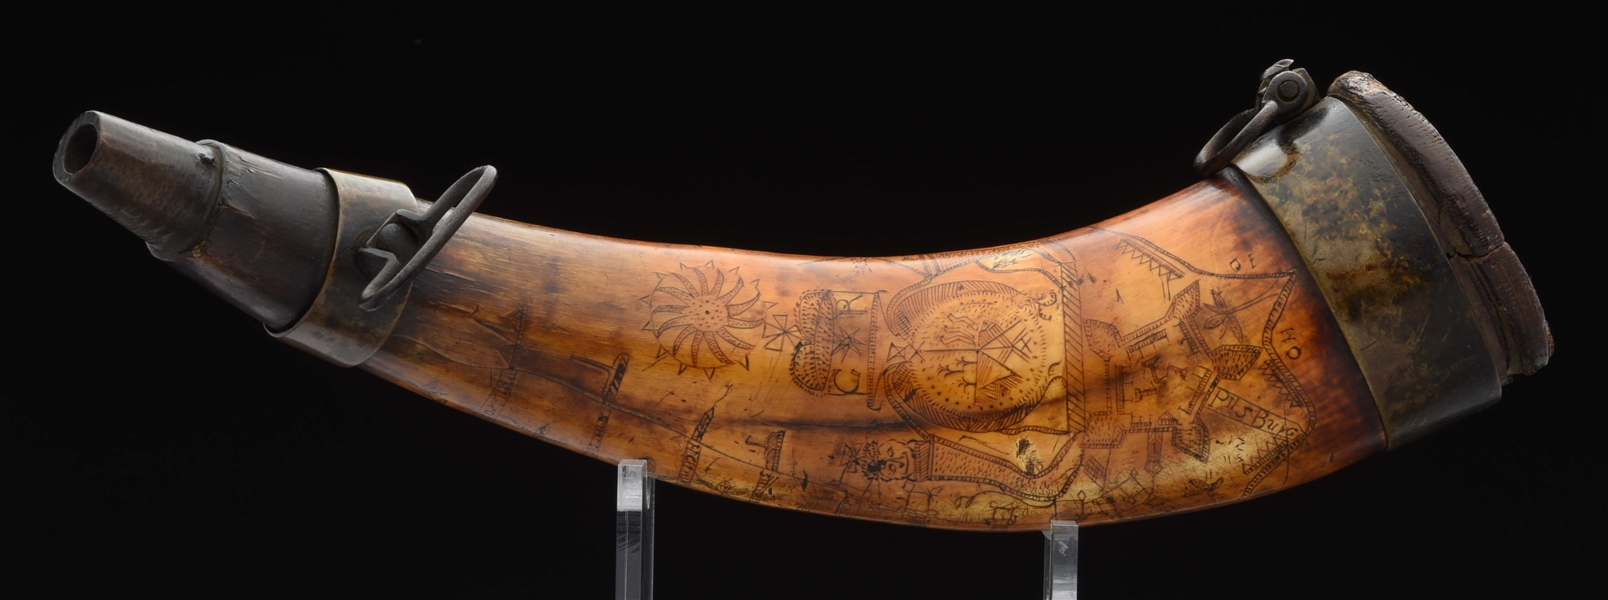 LARGE BRASS BANDED FORBES ROAD ENGRAVED MAP POWDER HORN INSCRIBED "GOD BLES THE MASTER", EX. DUMONT COLLECTION.